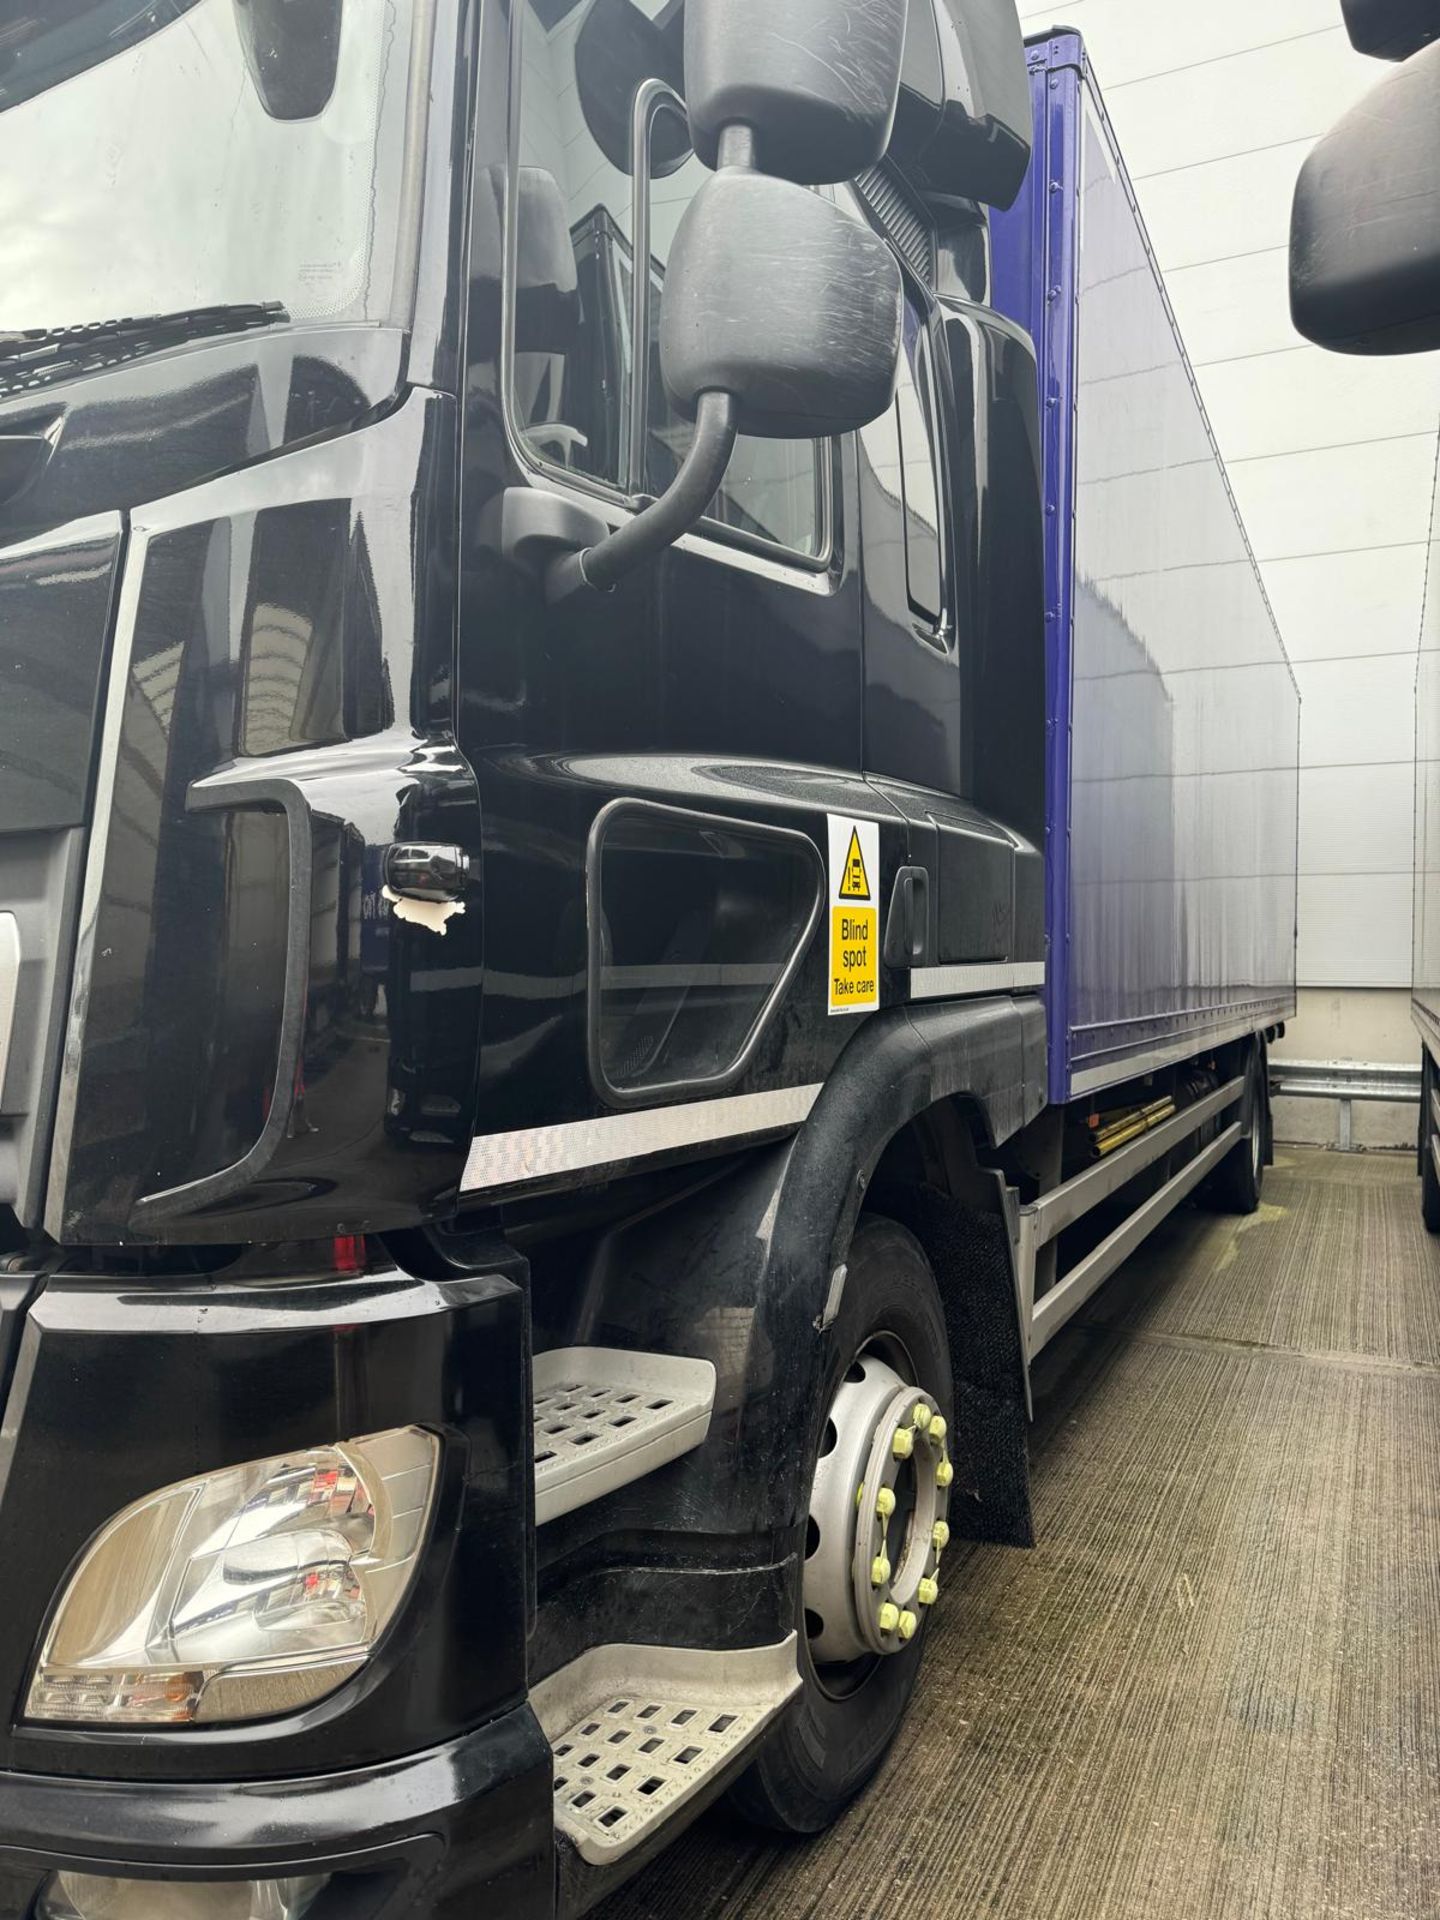 2019, DAF CF 260 FA (Ex-Fleet Owned & Maintained) - FN69 AXG (18 Ton Rigid Truck with Tail Lift) - Bild 4 aus 7